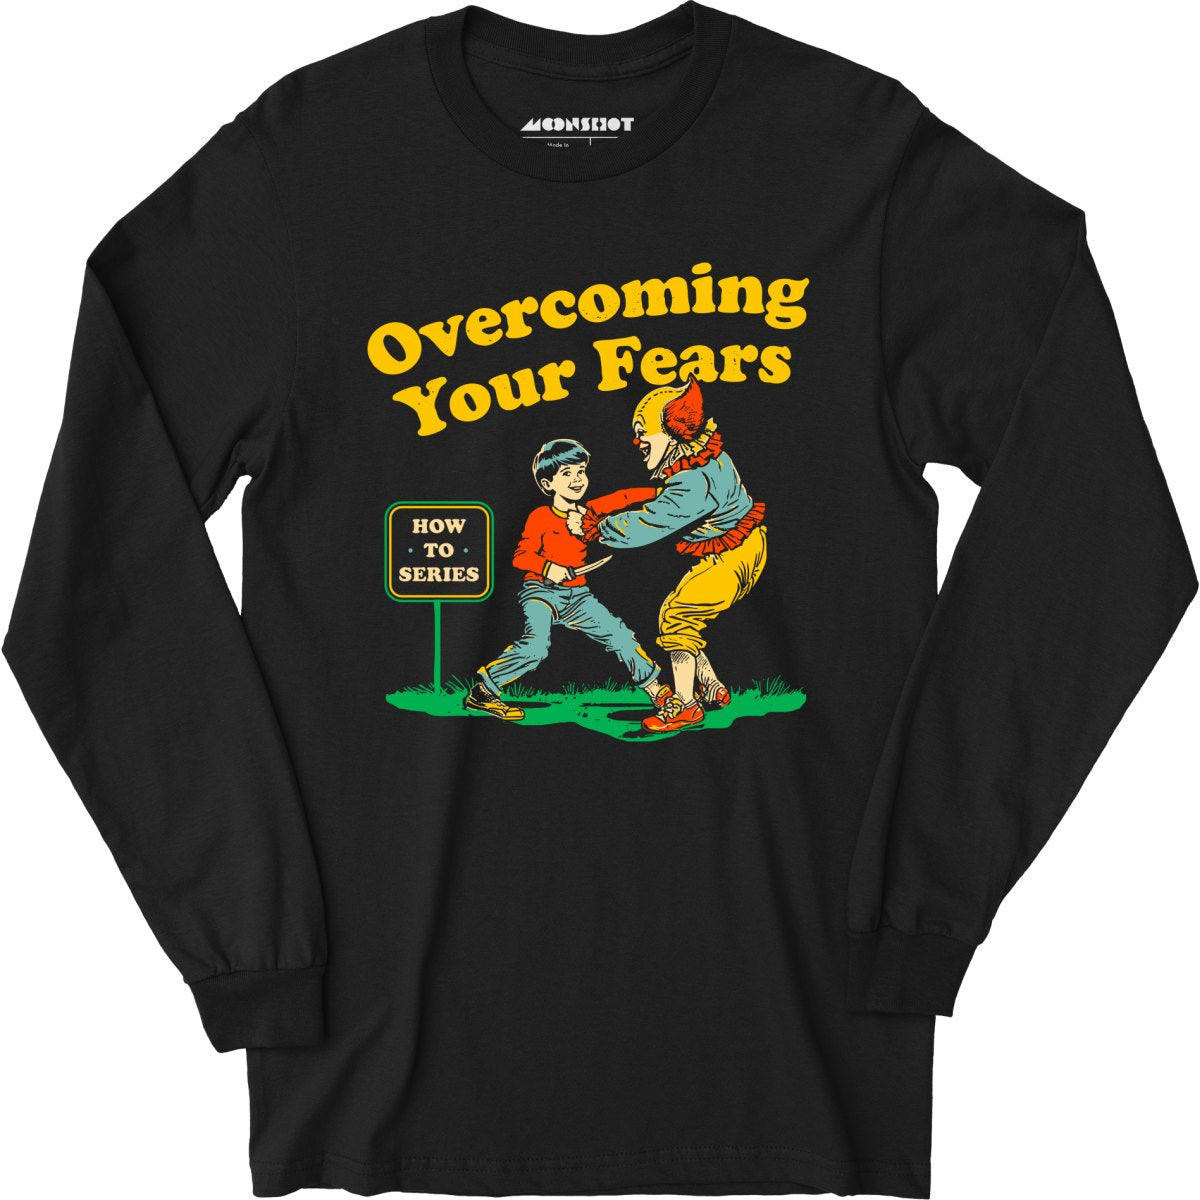 Overcoming Your Fears - Long Sleeve T-Shirt